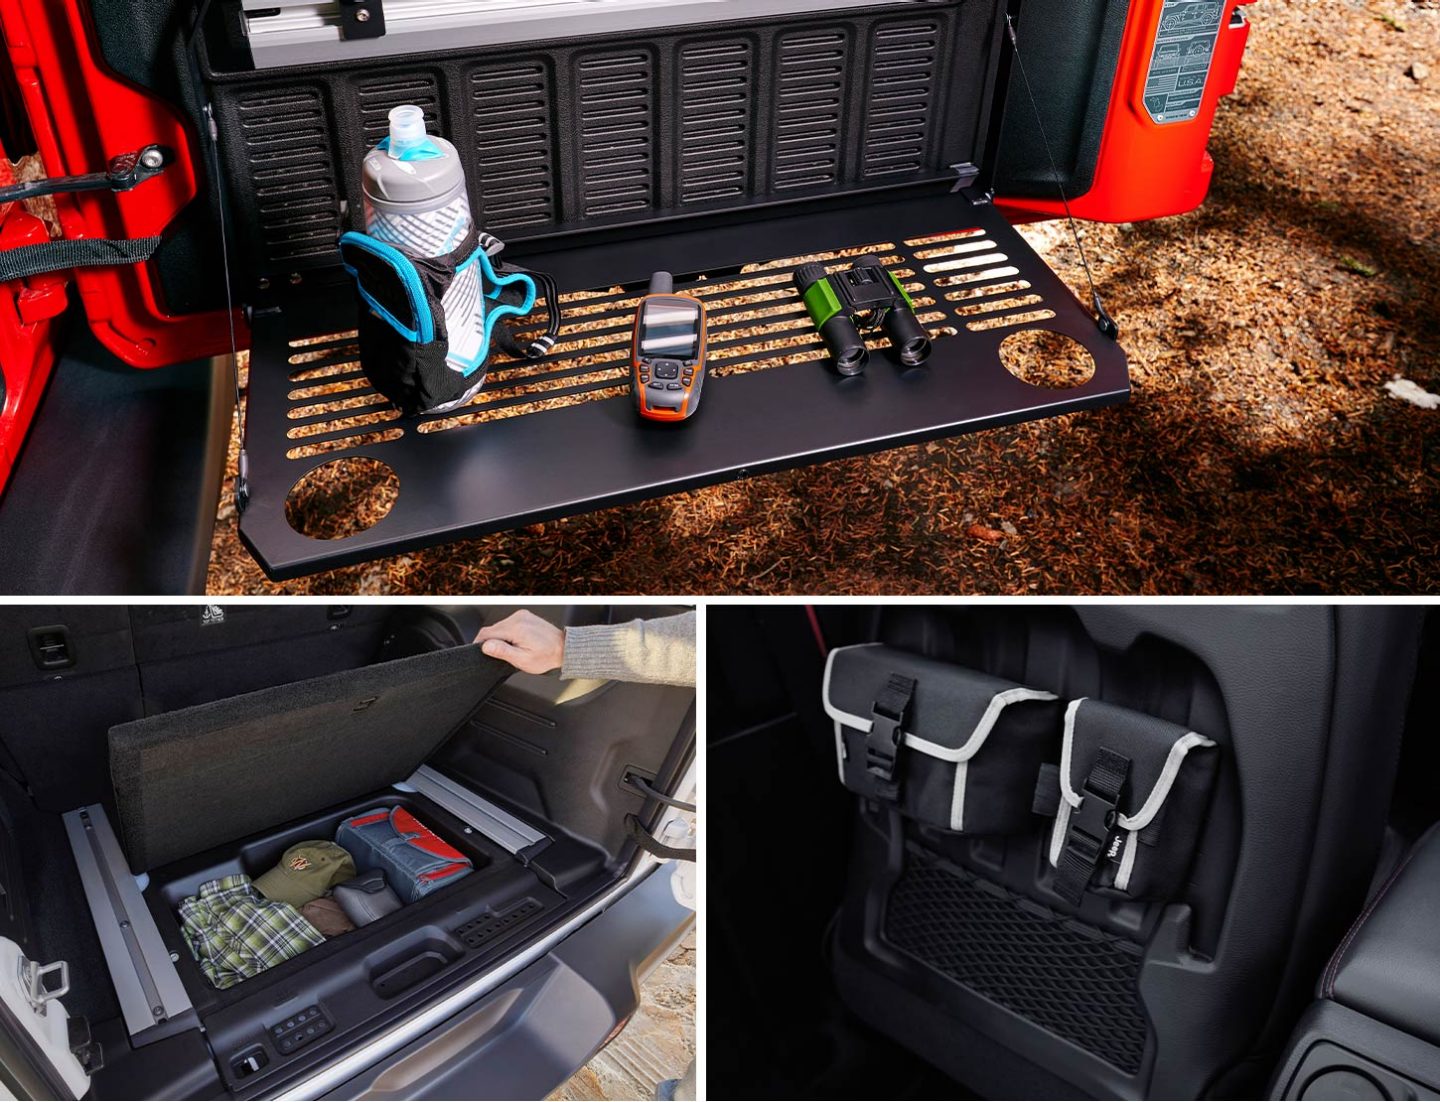 The Trail Rail system in the 2020 Jeep Wrangler with the drop-down table open. The rear storage compartment in the 2020 Jeep Wrangler packed with clothes and luggage. The seatback storage bins in the 2020 Jeep Wrangler.